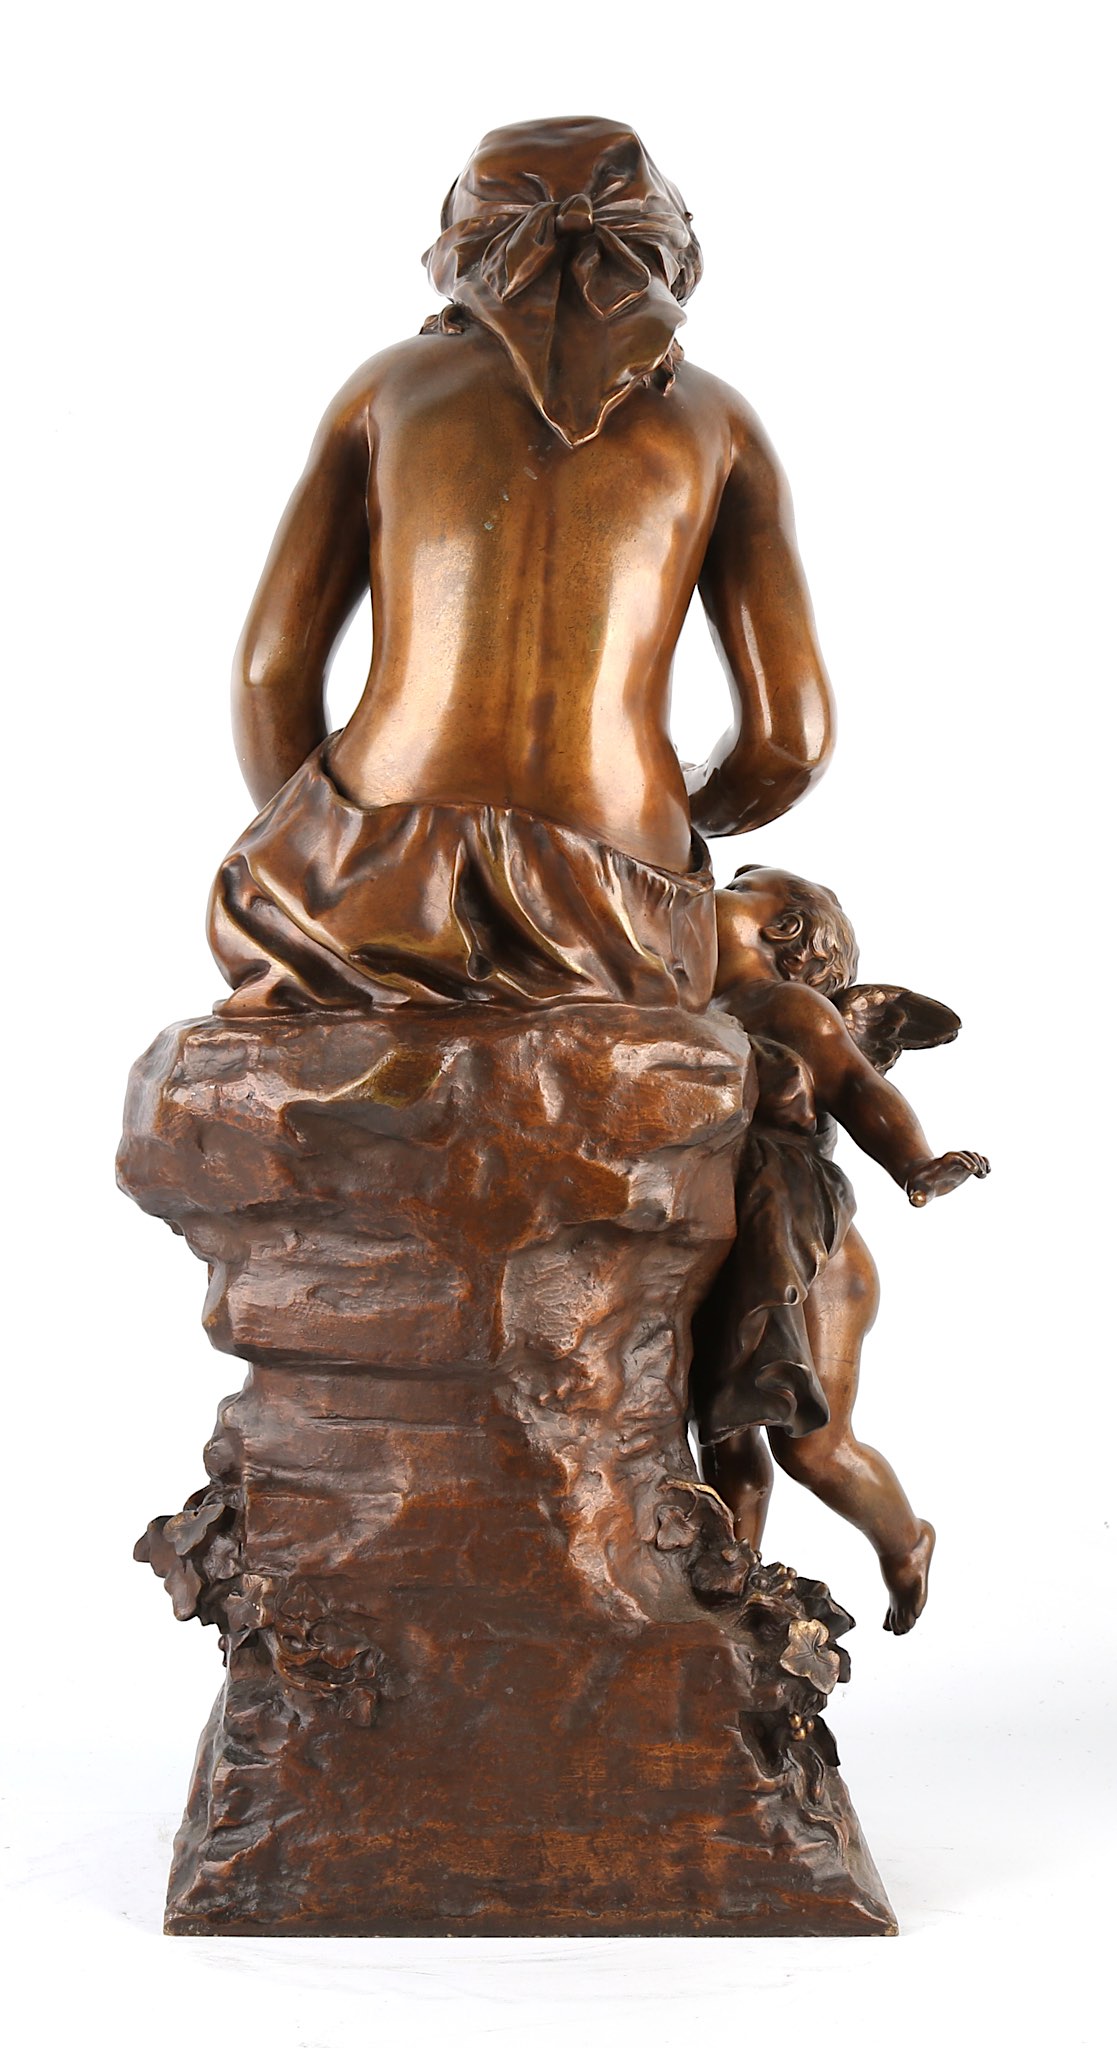 MATHURIN MOREAU (FRENCH 1822-1912): A LARGE BRONZE FIGURE DEPICTING A MAIDEN OFFERING WATER TO A - Image 9 of 11